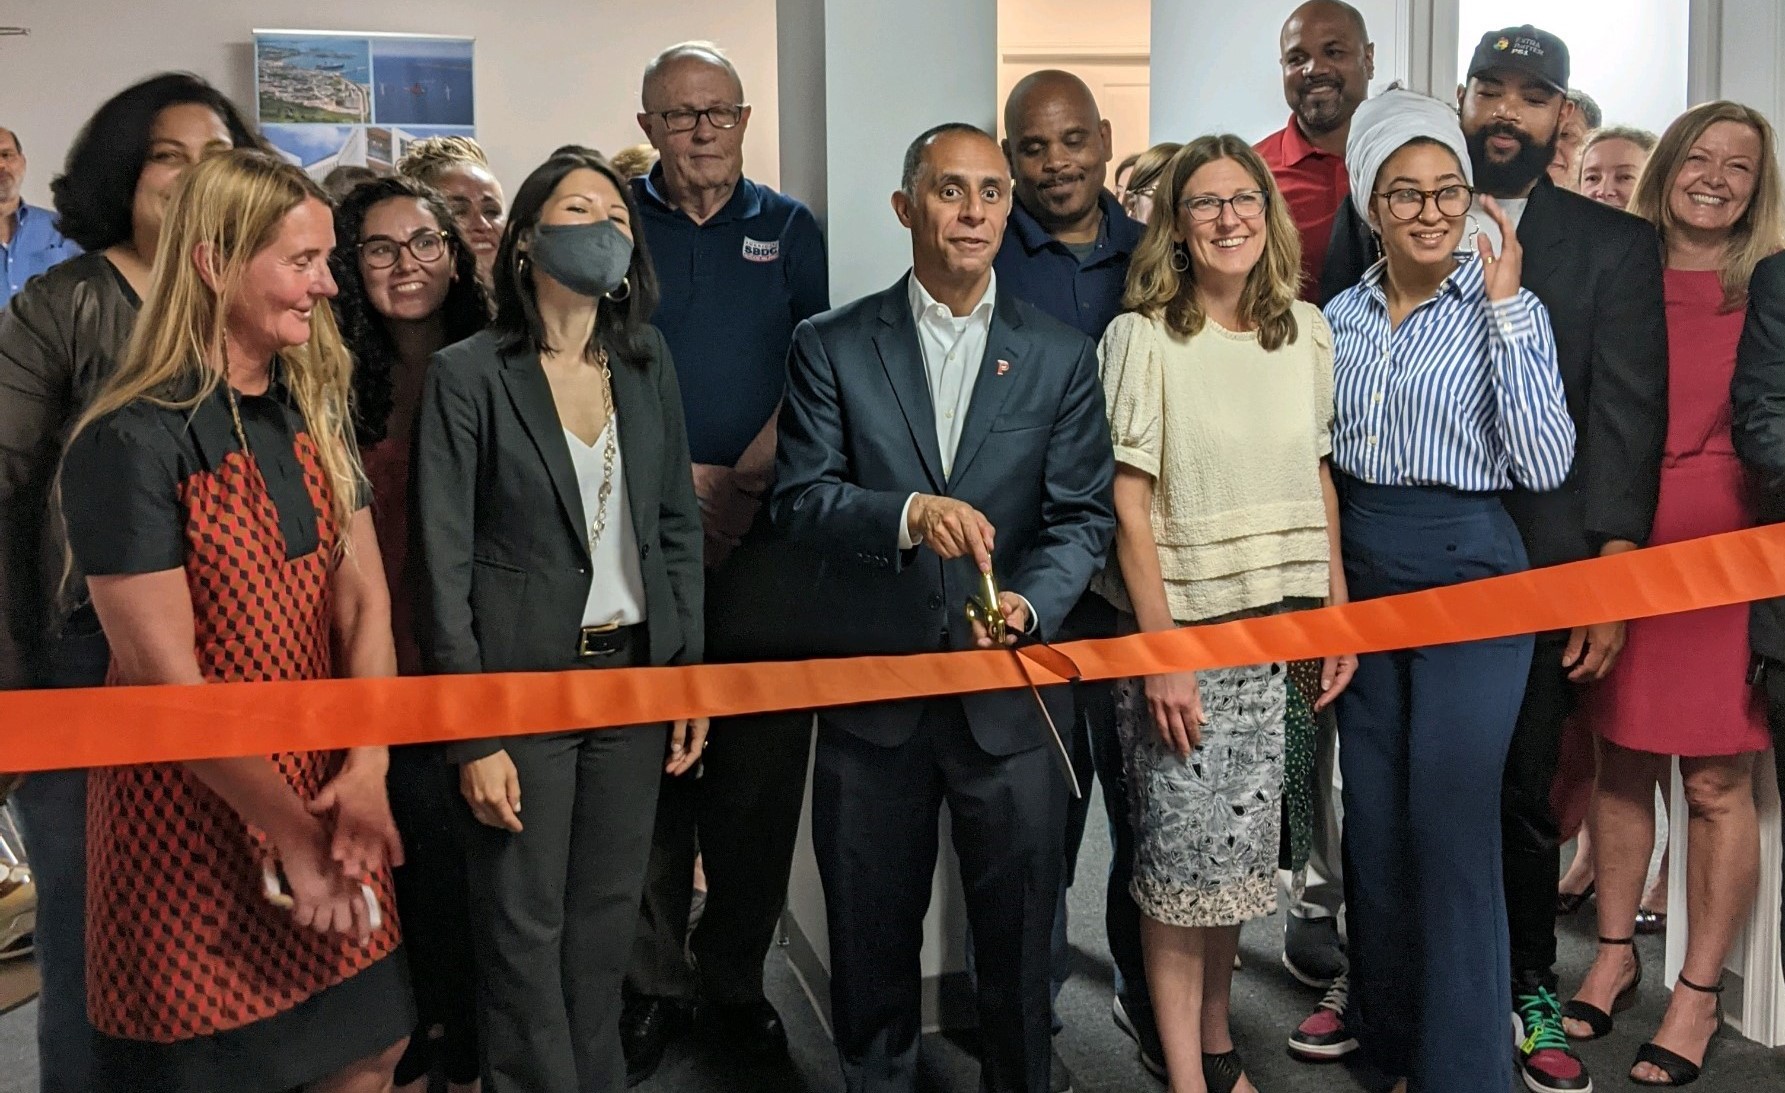 Small business support center opens in Providence